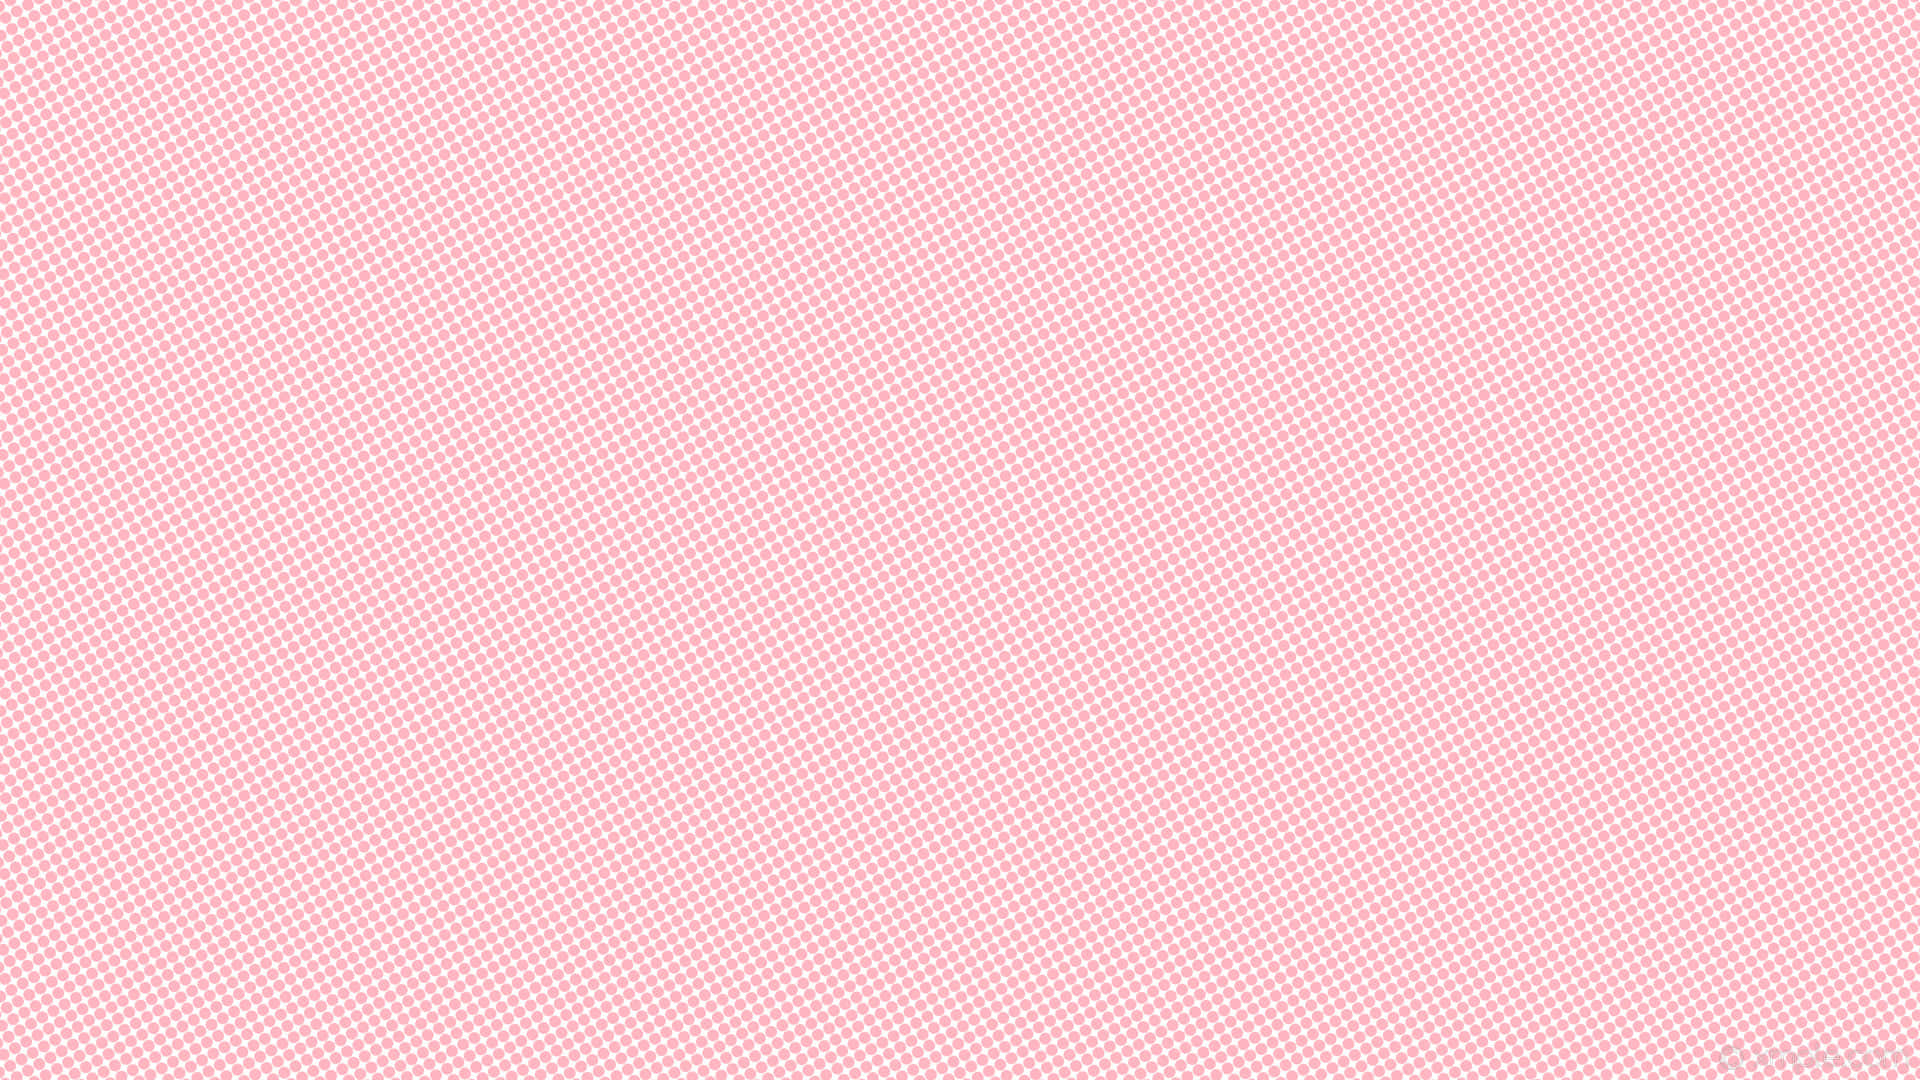 A Pink And White Striped Wallpaper Wallpaper